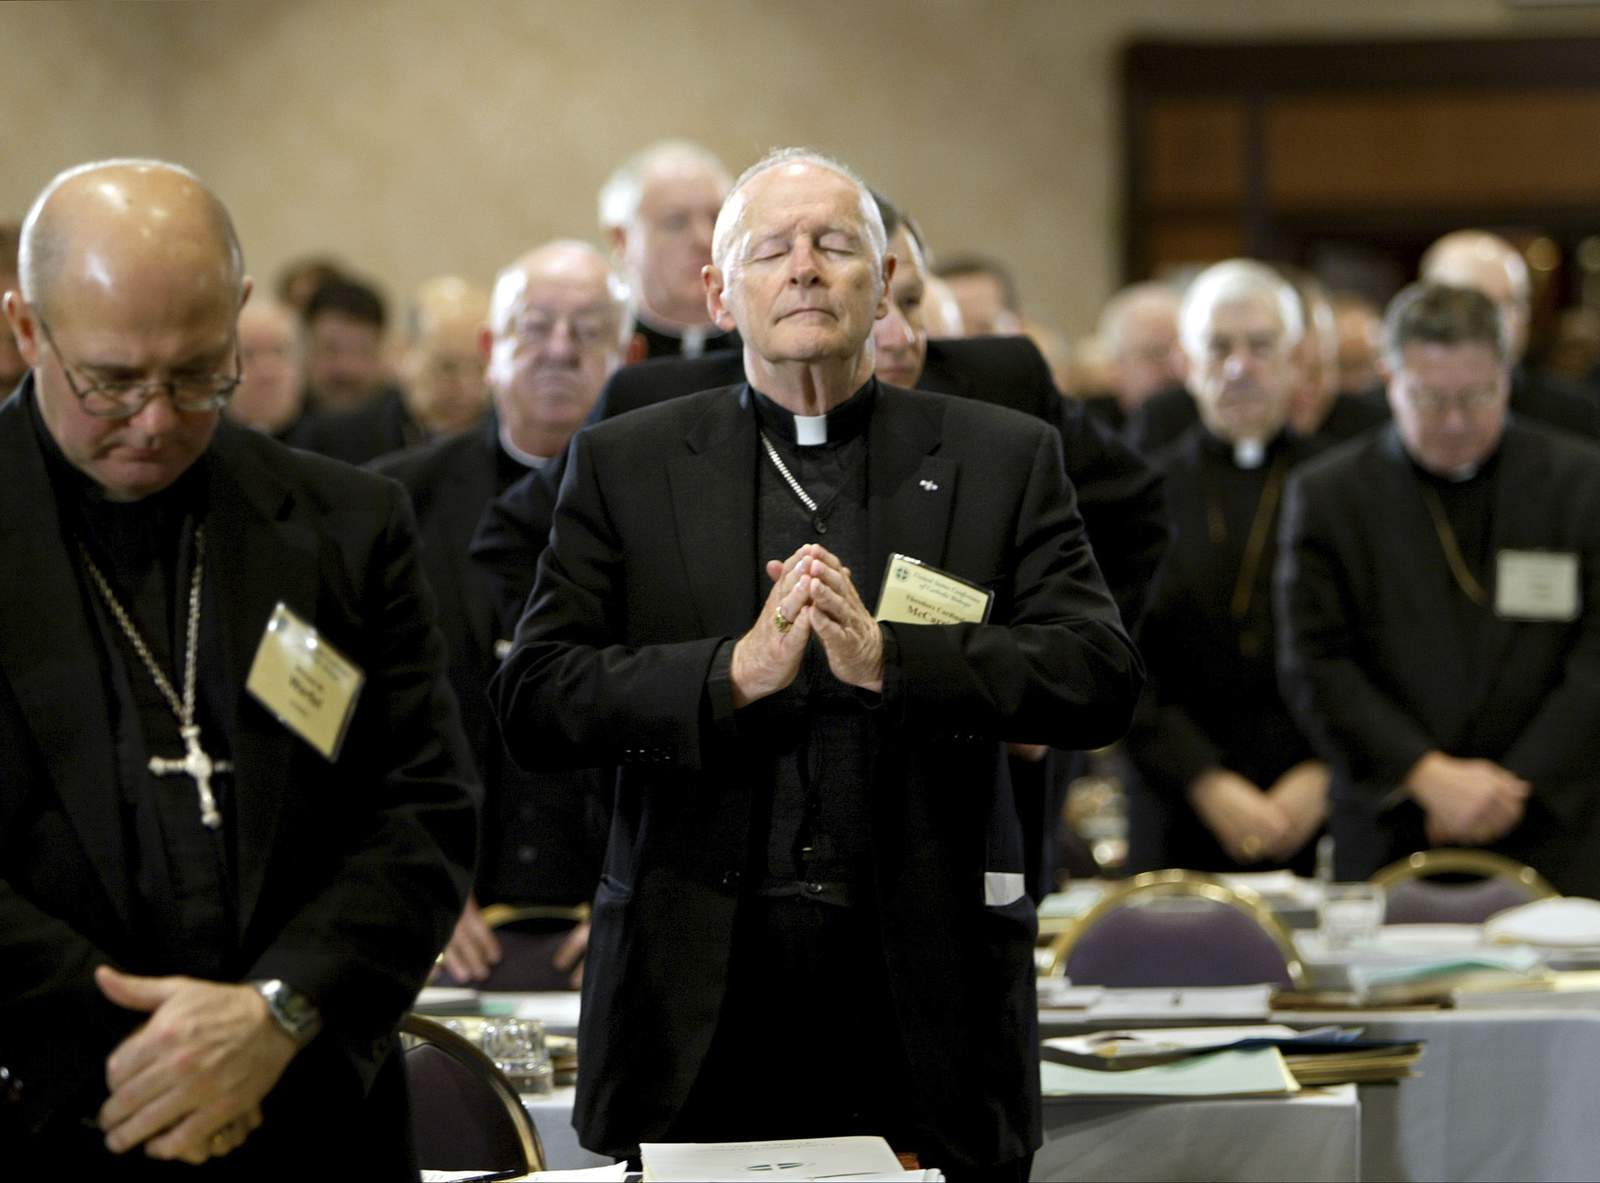 In a moment of turmoil, US Catholic bishops meet virtually